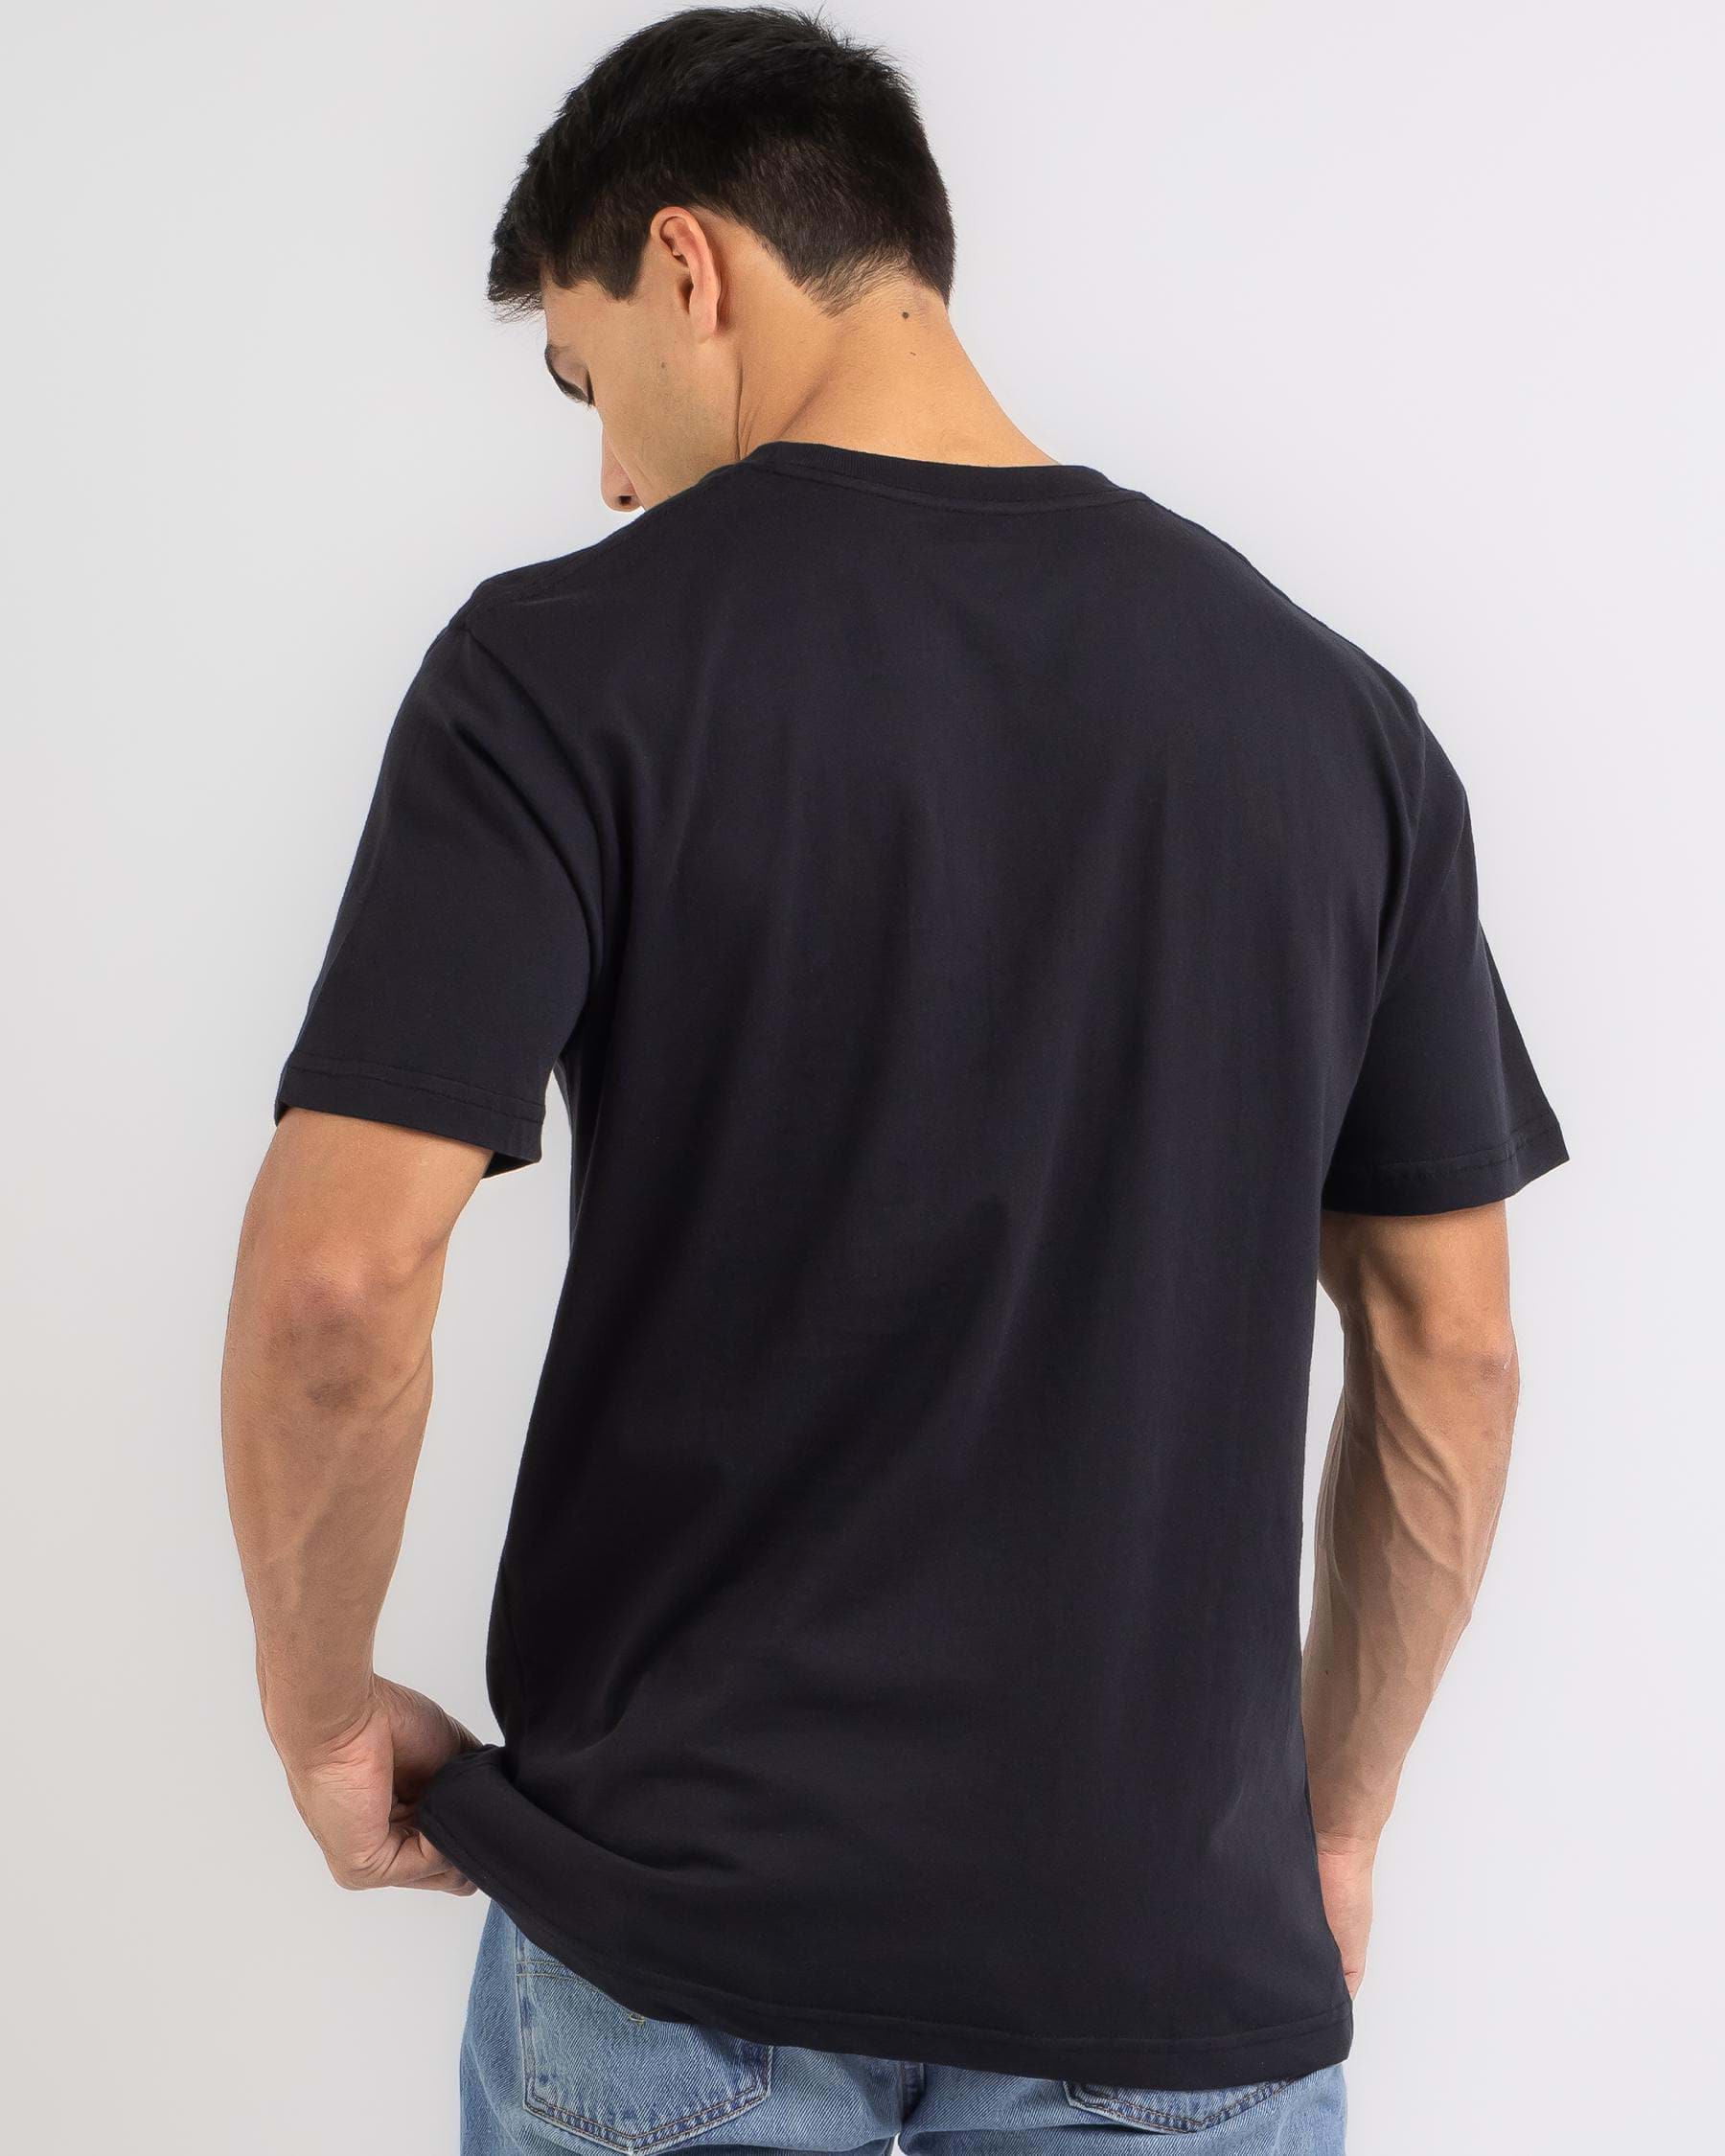 DC Shoes In Easy Beach United Star States Black - Returns Shipping City T-Shirt FREE* DC Fill & 